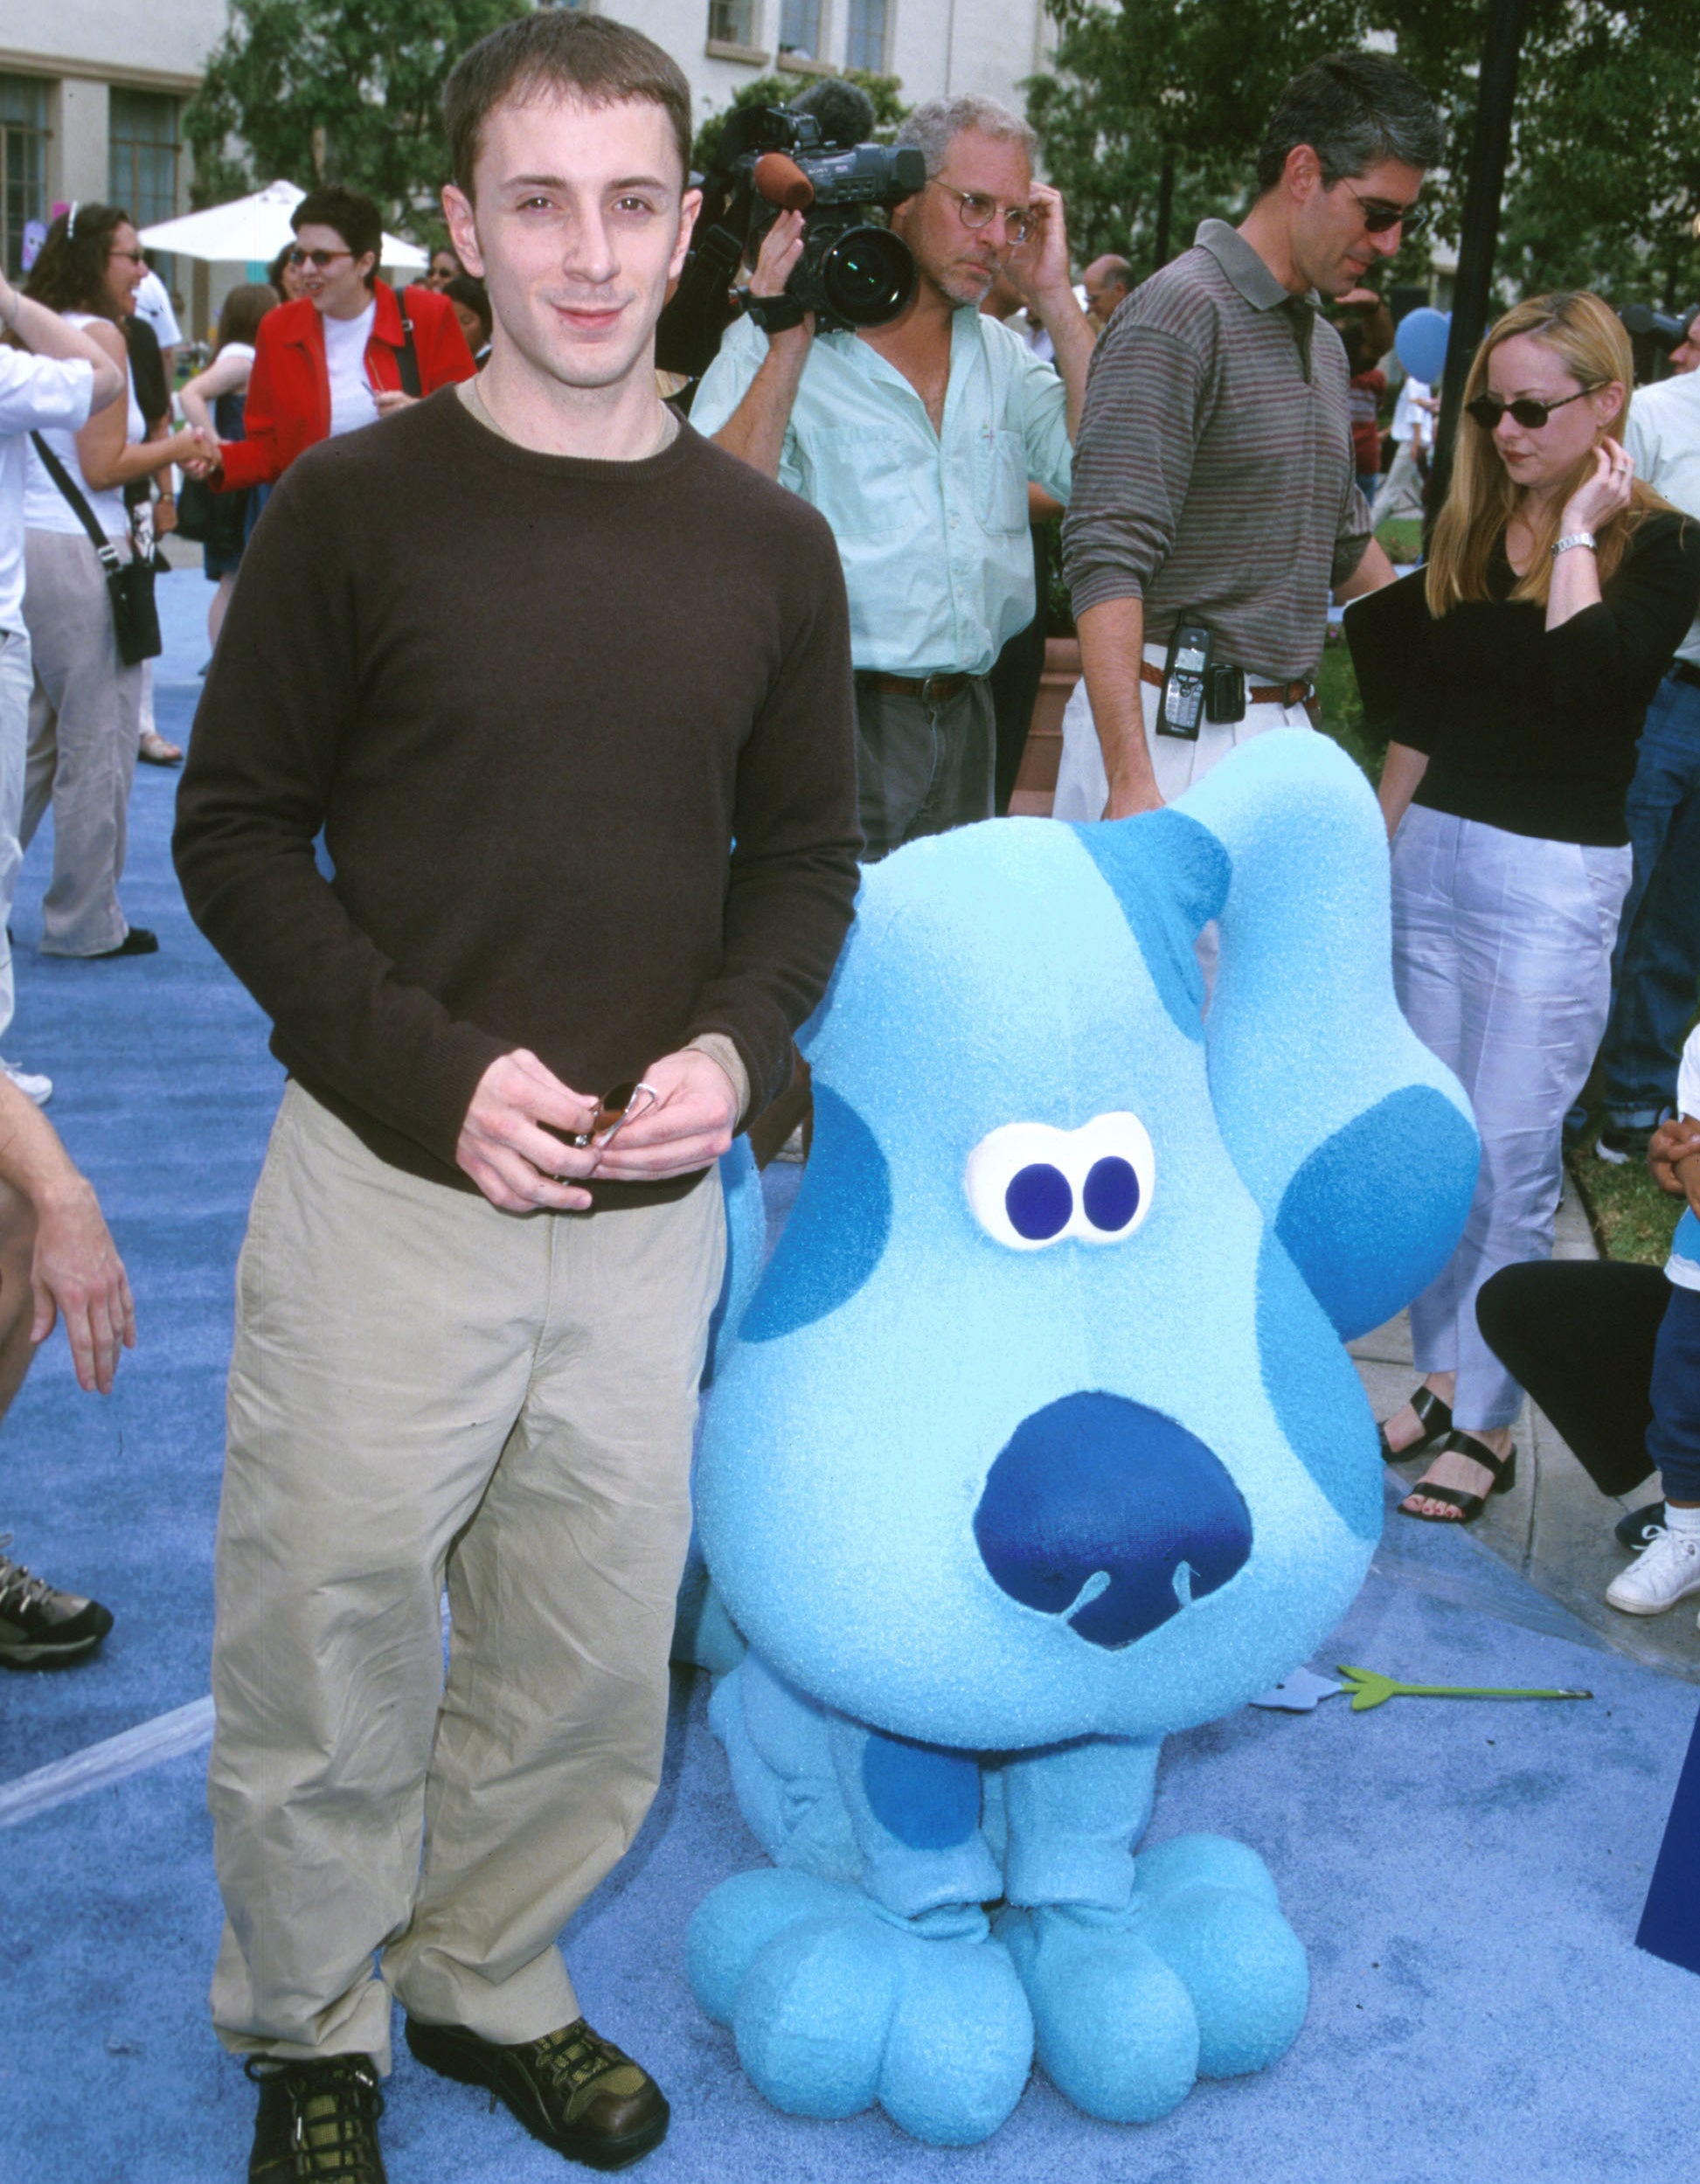 Steve standing on a blue carpet at an event next to a life-size Blue mascot